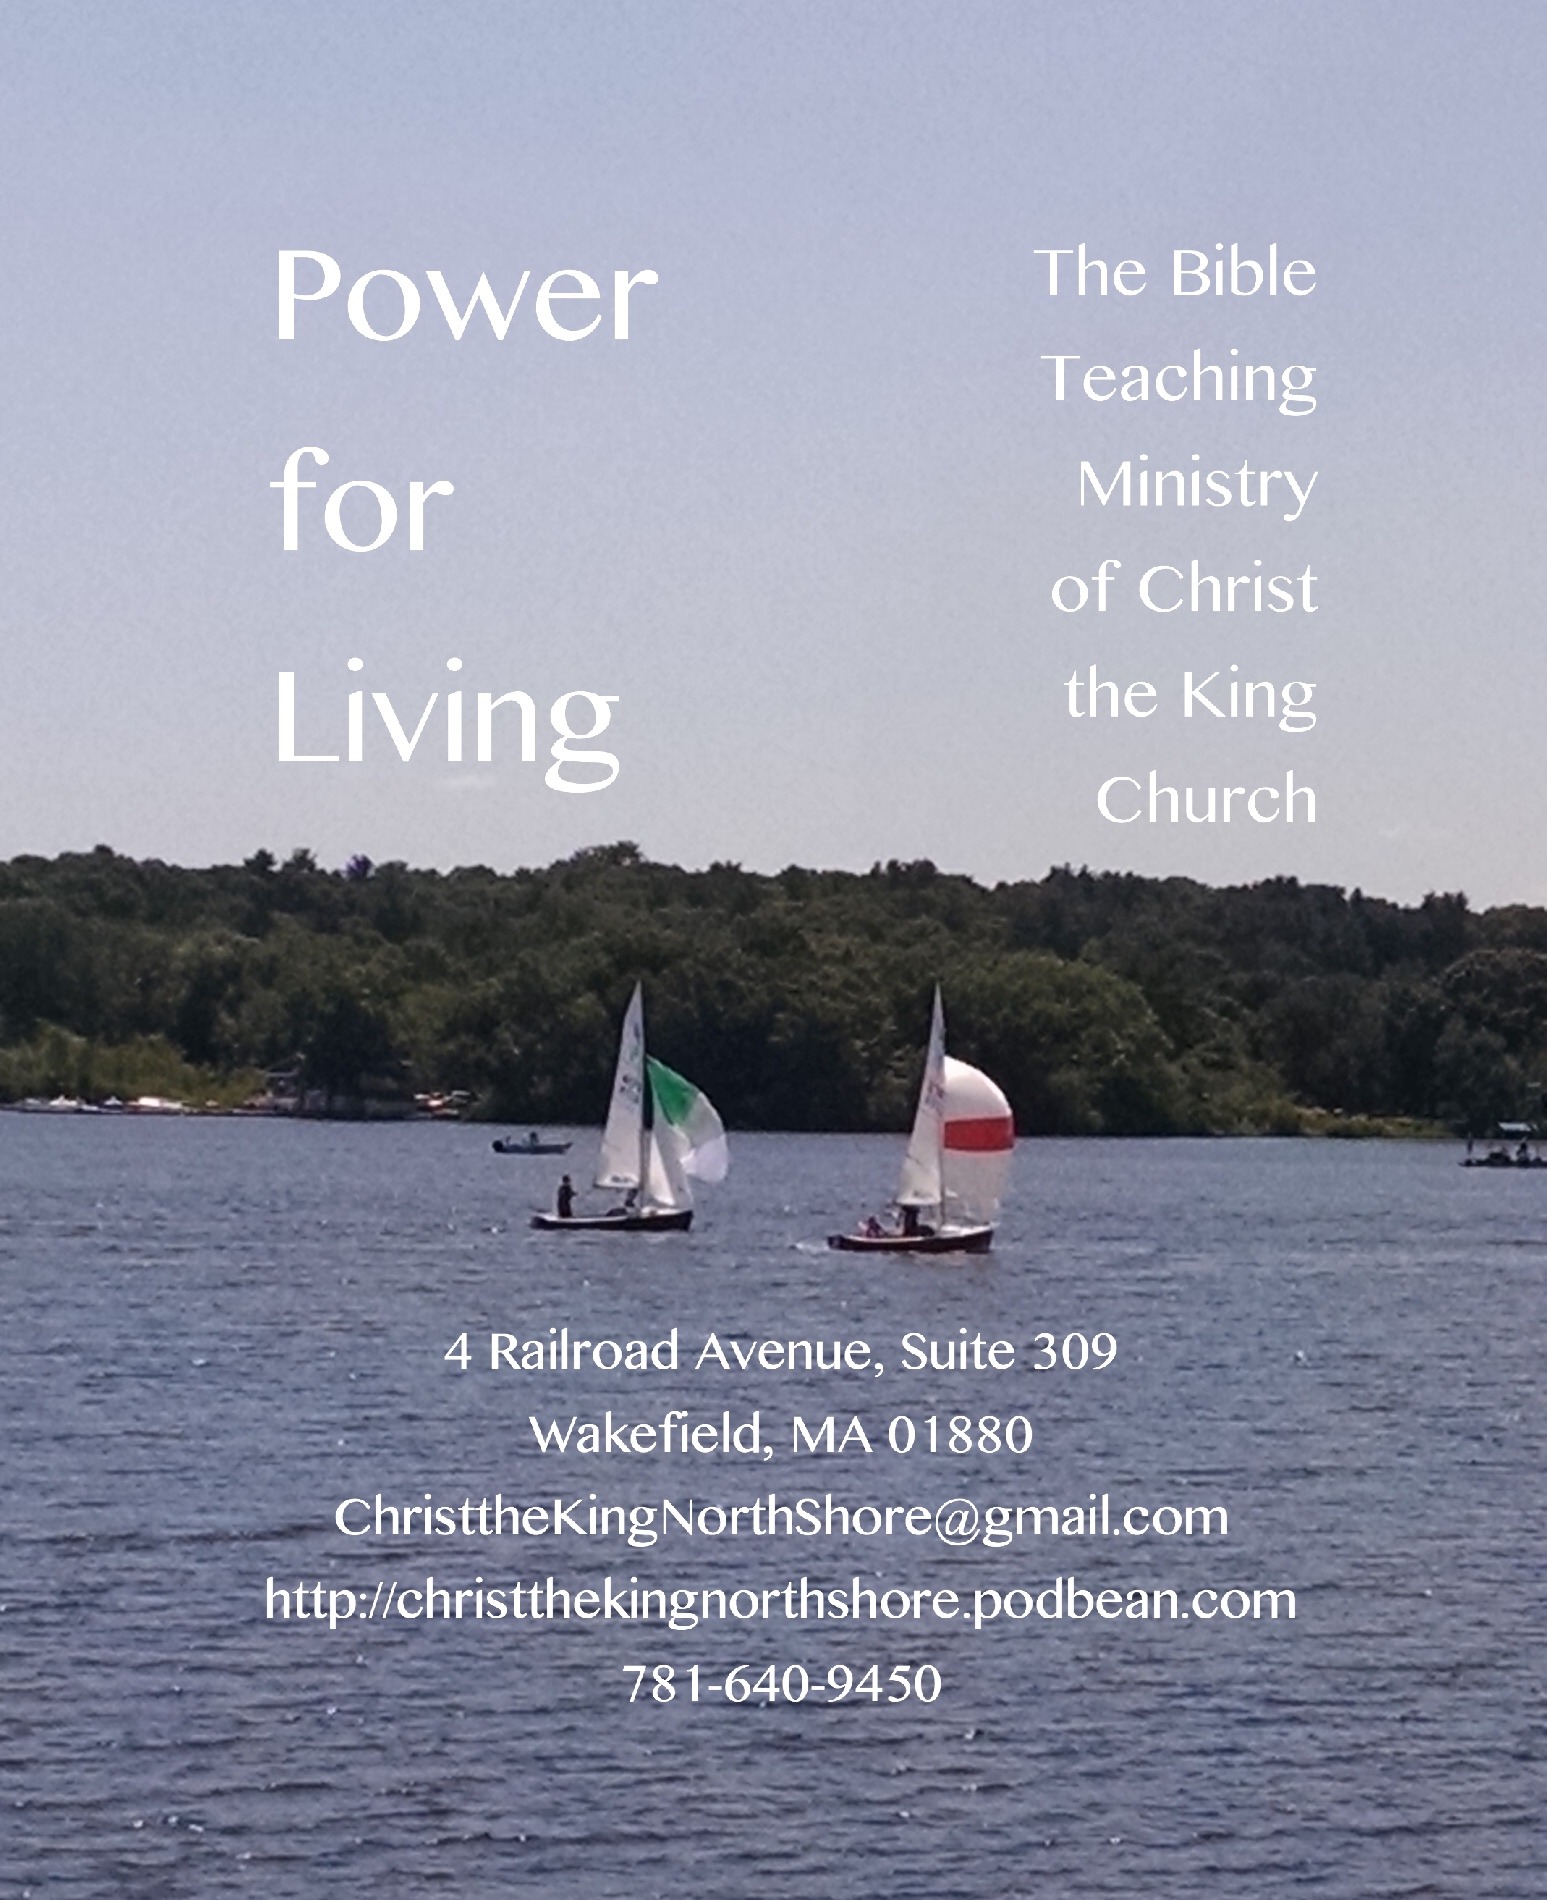 Power for Living, Episode 160814, The Reason Why